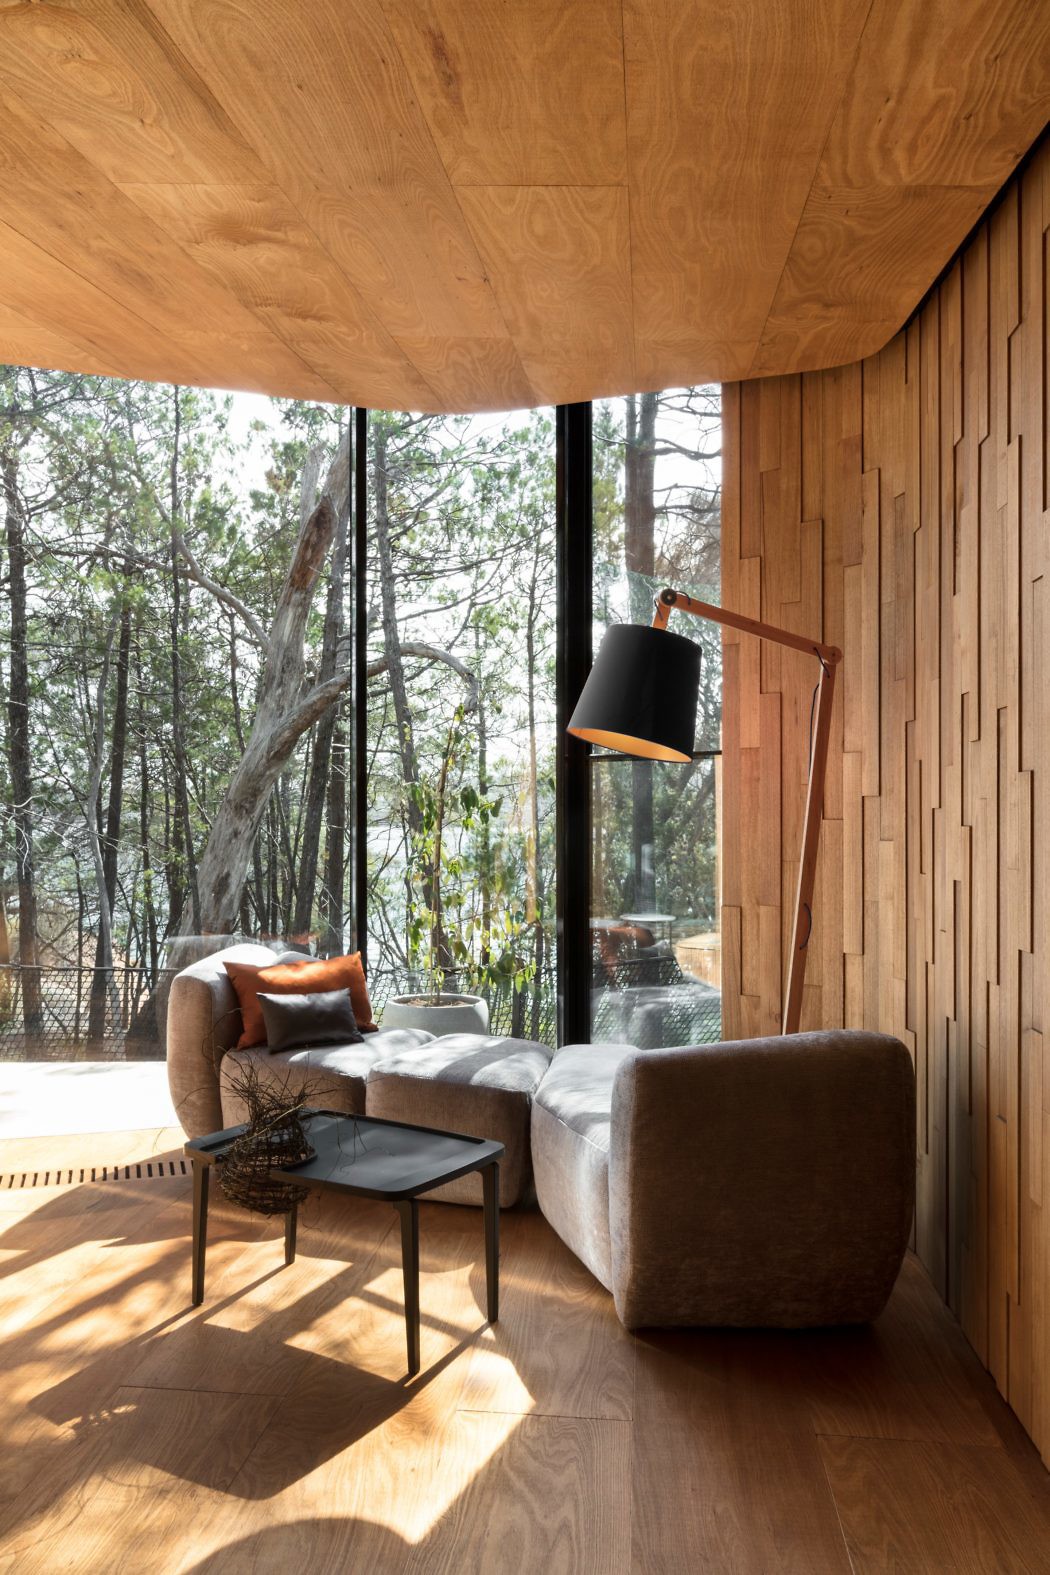 Modern interior with wood paneling and floor-to-ceiling windows overlooking trees.